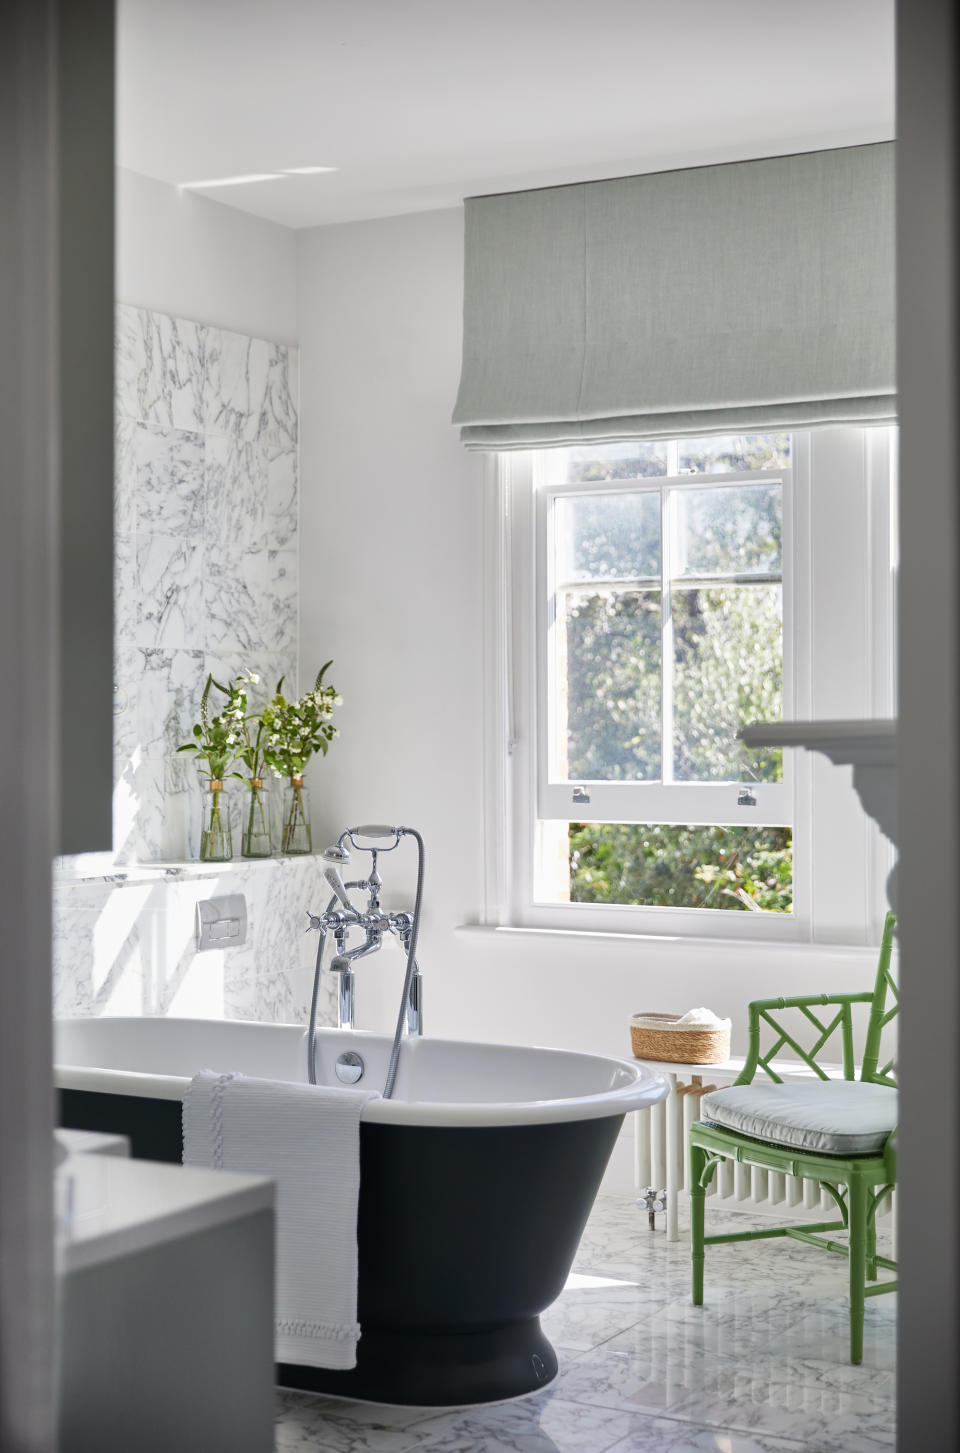 <p> &apos;This room benefits from big, beautiful sash windows which are an instant bonus as the light adds to the sense of scale in what is already a generously proportioned space,&apos; says Natascha Dartnall, interior designer and founder of ND Studios.&#xA0;&apos;Having a free-standing roll top bath is often top of the wish list for many of our clients as they are synonymous with opulence and the promise of relaxation. This tub with its matt exterior finish in black adds contrast and depth to the room; bathrooms with too much white can look a little sterile or impersonal. This is also why the pea green chair works so well here &#x2013; it adds color and texture. Also, a chair is always a good idea in a bathroom for practical reasons such as draping robes over while you bathe.&apos; </p> <p> &apos;Marble will work in any bathroom &#x2013; it always looks, clean, fresh and speaks to understated extravagance. People often&#xA0;ask about bathroom storage as it can be difficult to navigate. Generally, rustic baskets are a godsend and prevent lotions and potions spreading untidily across every available space.&apos; </p>